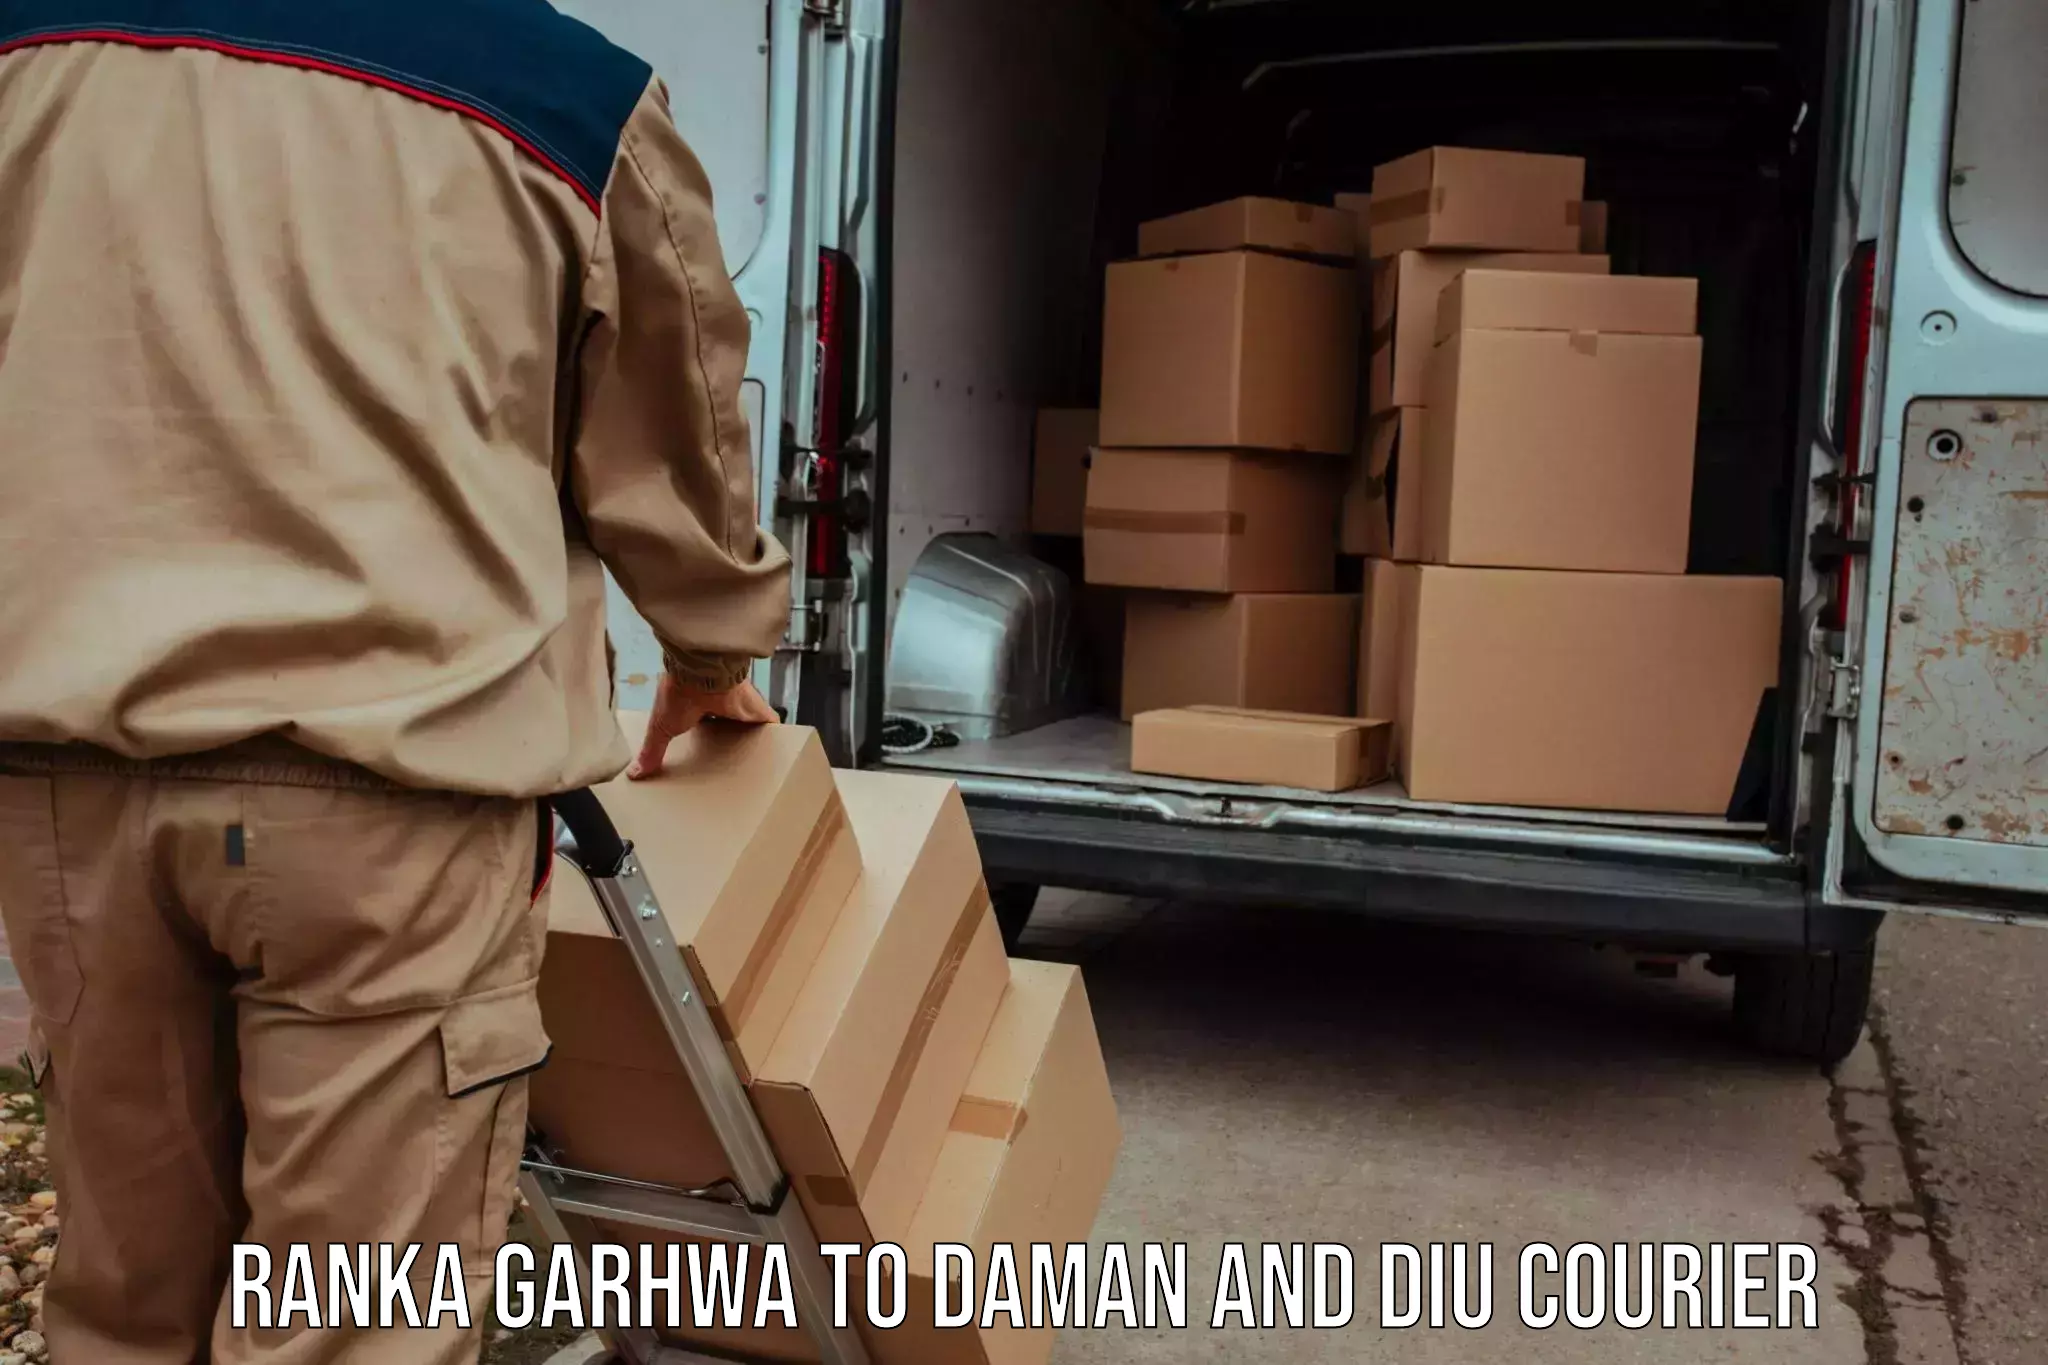 Automated parcel services Ranka Garhwa to Daman and Diu